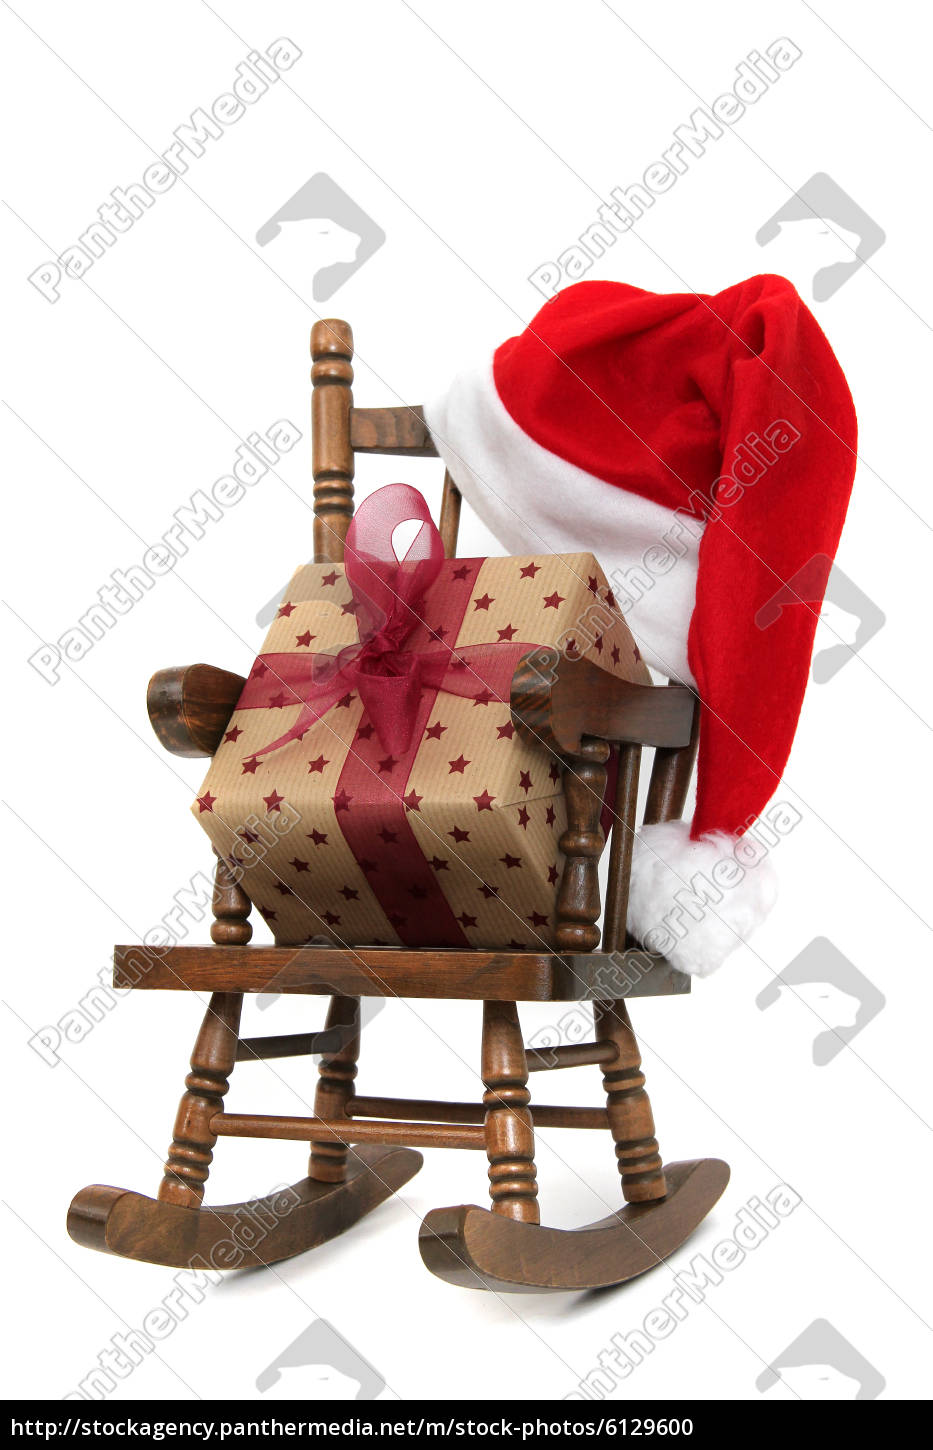 Old Wooden Rocking Chair With Red Jelly Bag Cap And Royalty Free